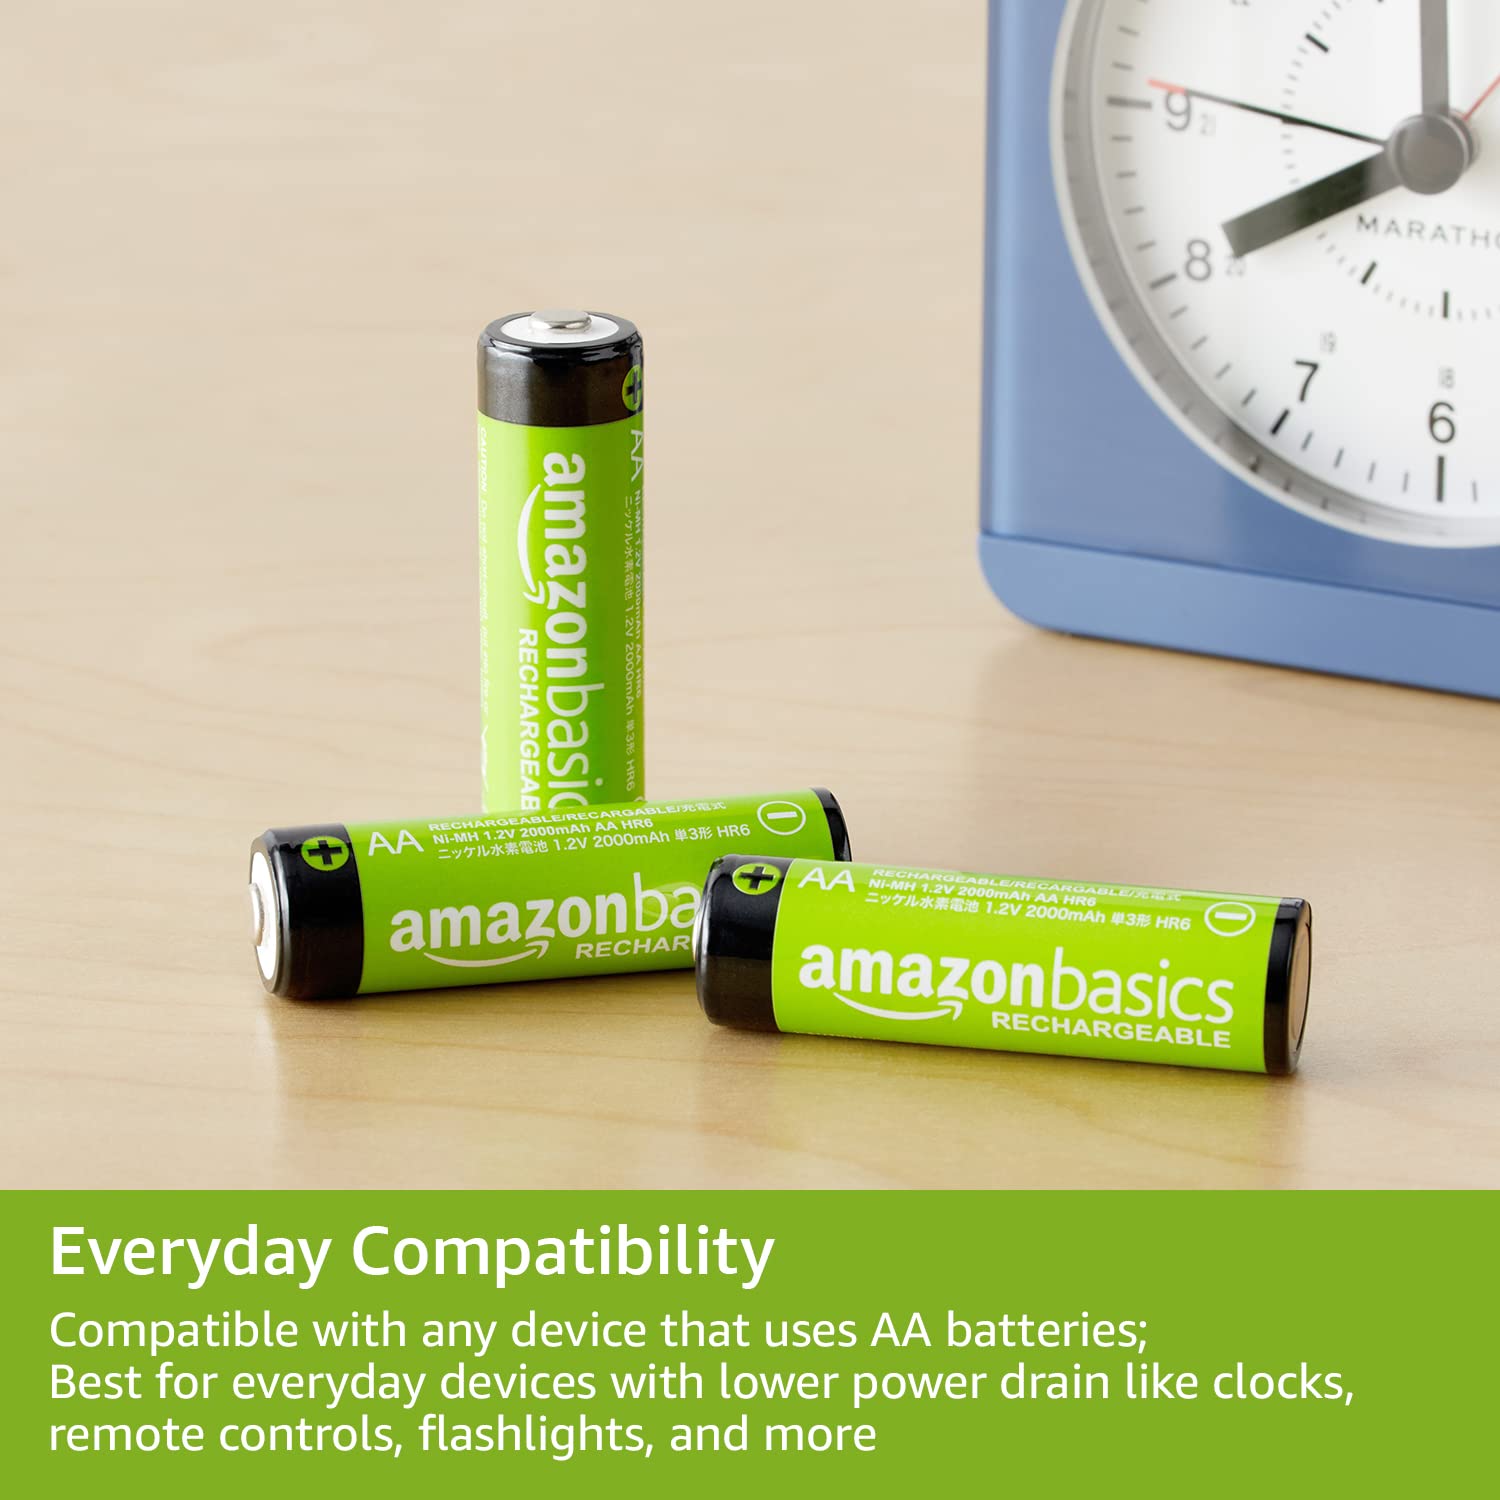 Amazon Basics Rechargeable AA NiMH Batteries, 2000 mAh, Recharge up to 1000x, Pre-Charged - Pack of 8